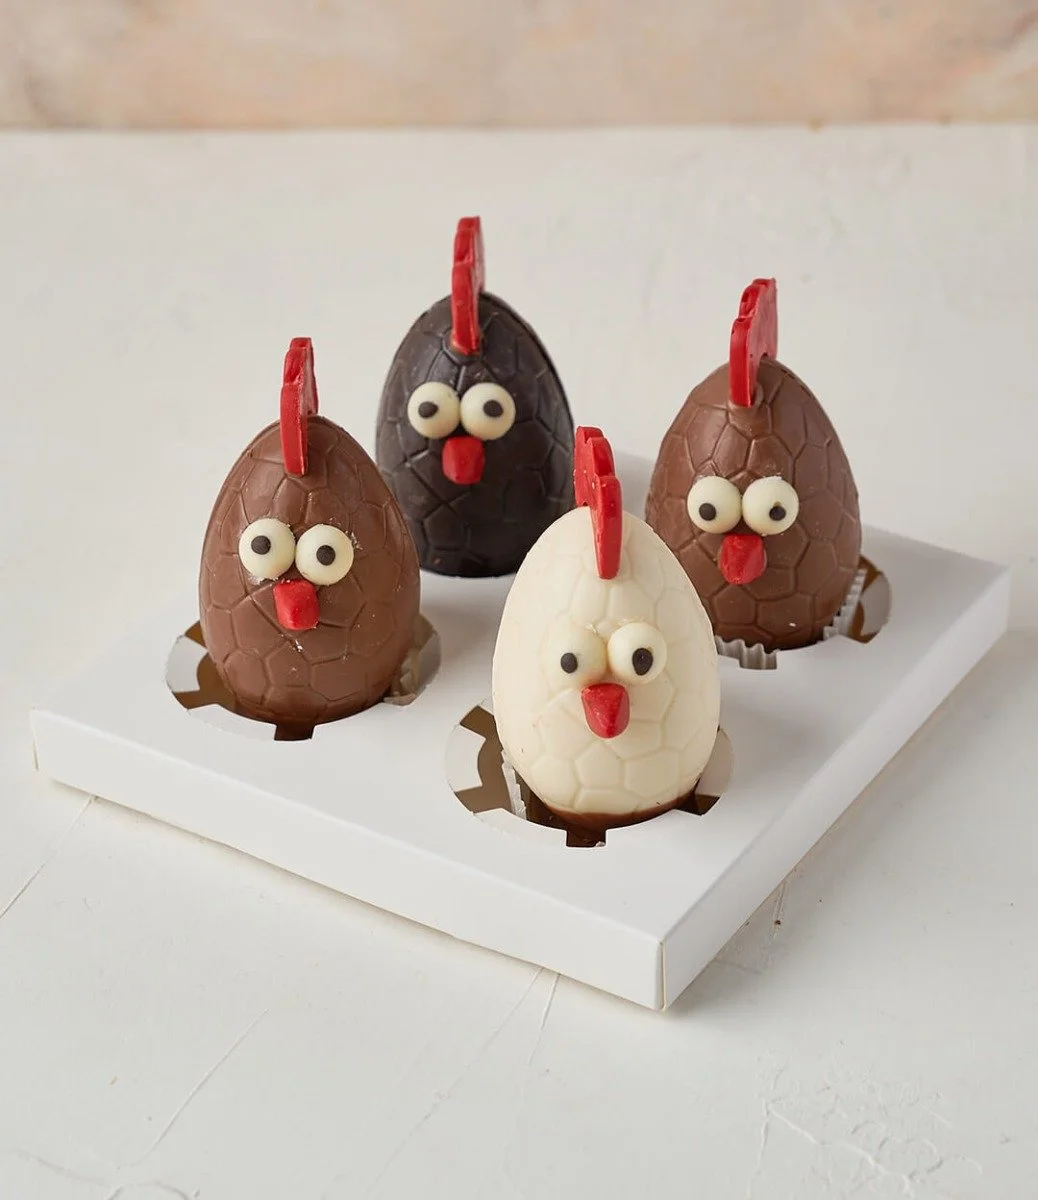 Chocolate Roosters by NJD